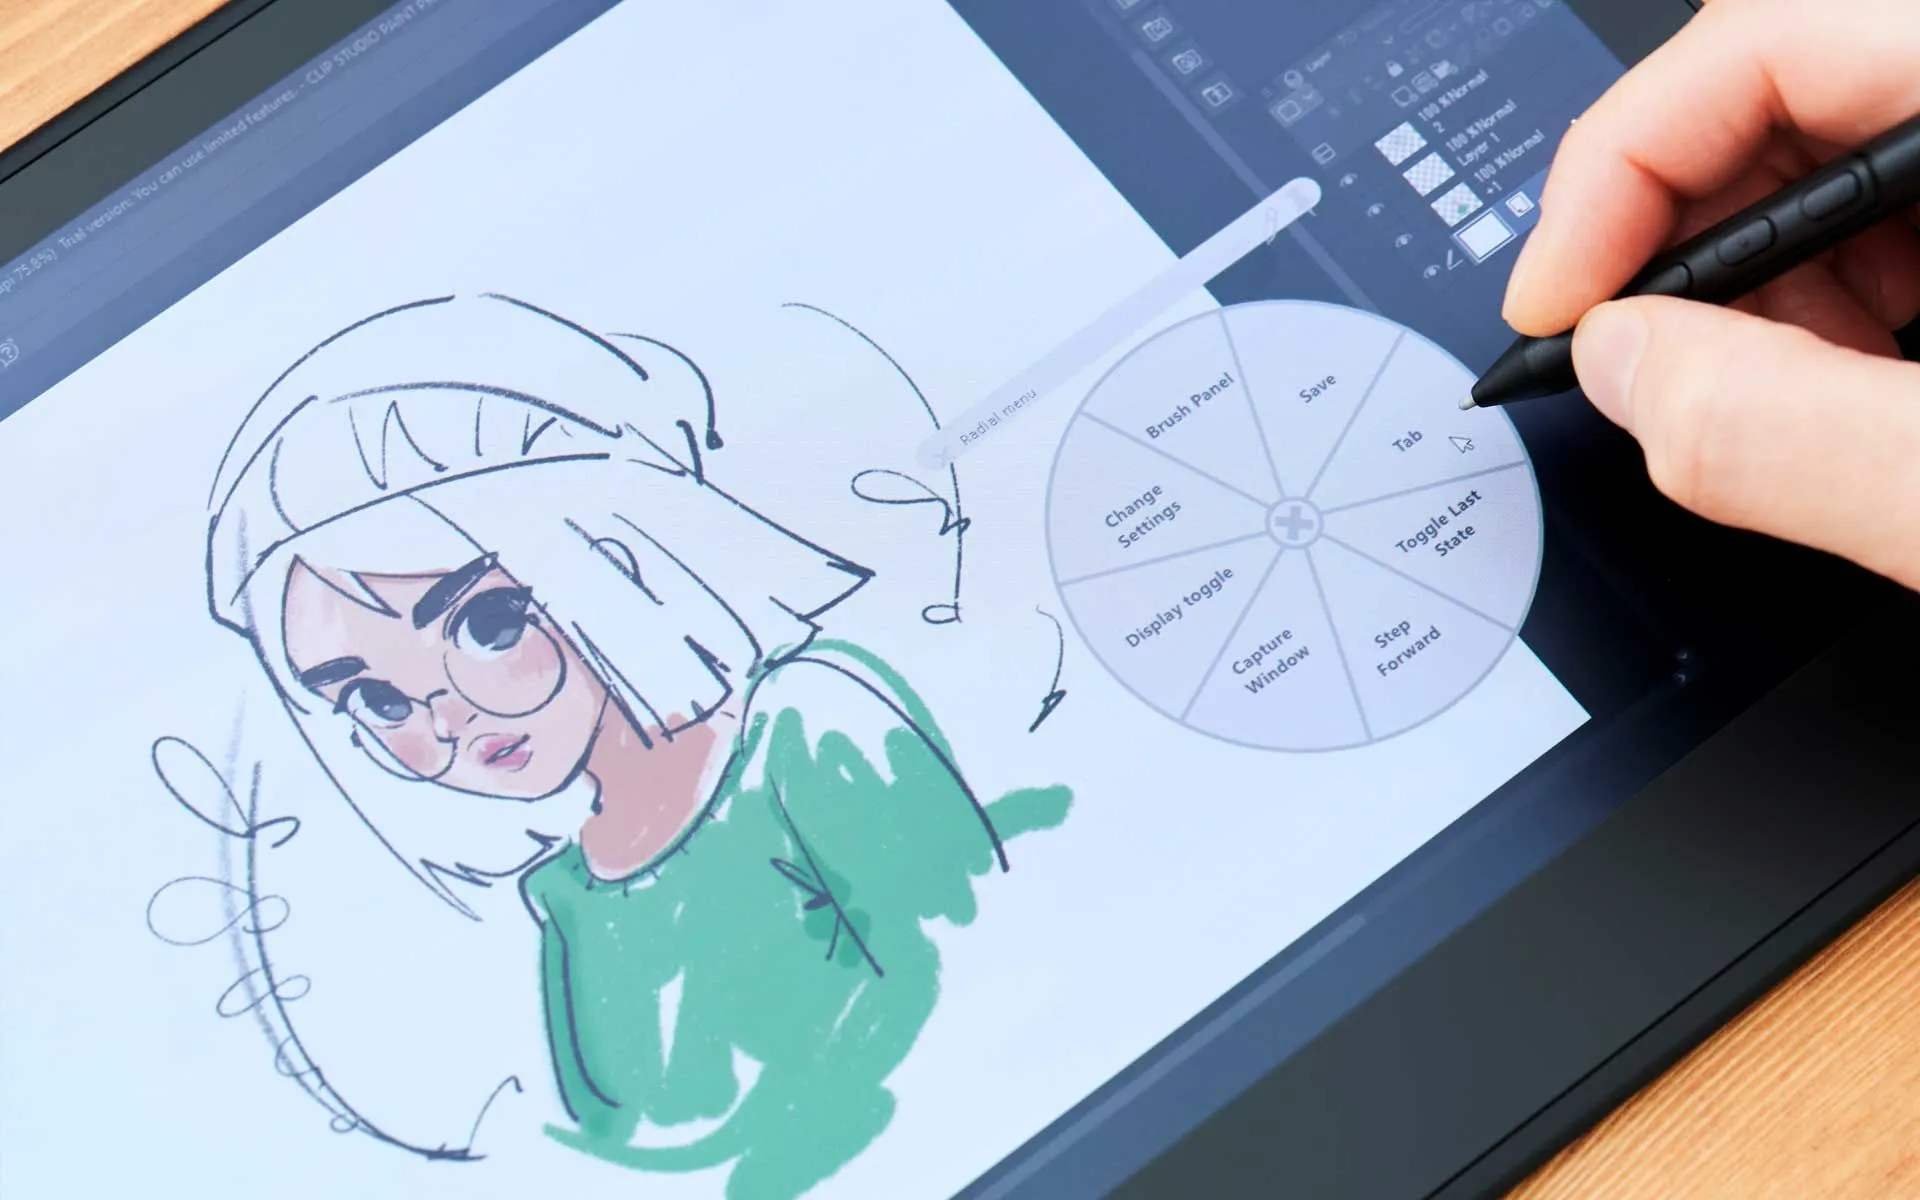 A hand using a stylus to draw a female cartoon character with glasses on a digital drawing tablet, which also displays a color wheel tool.